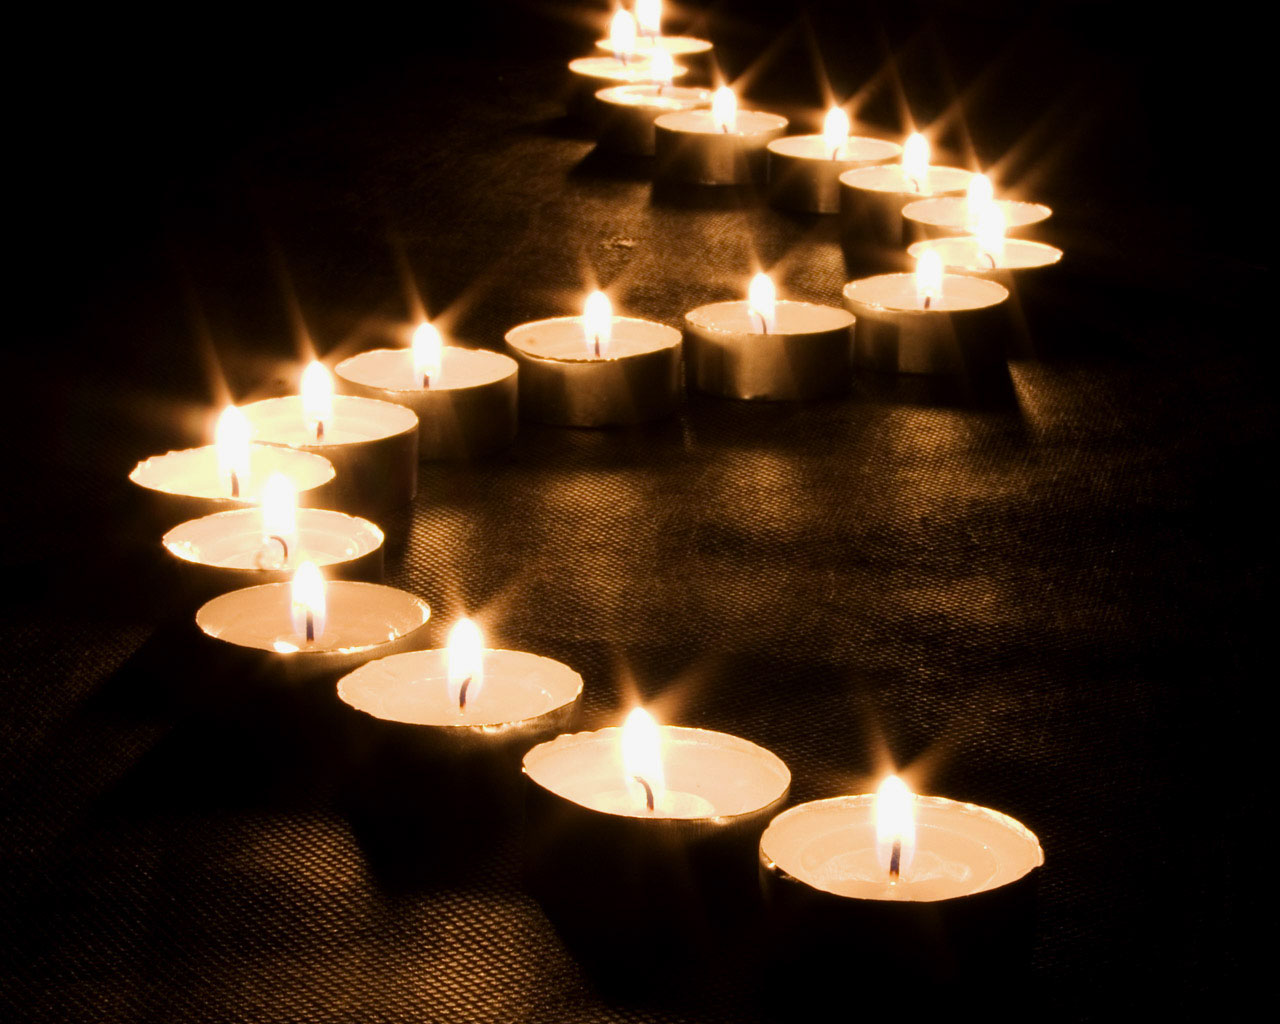 Candle Lighting The Way - HD Wallpaper 